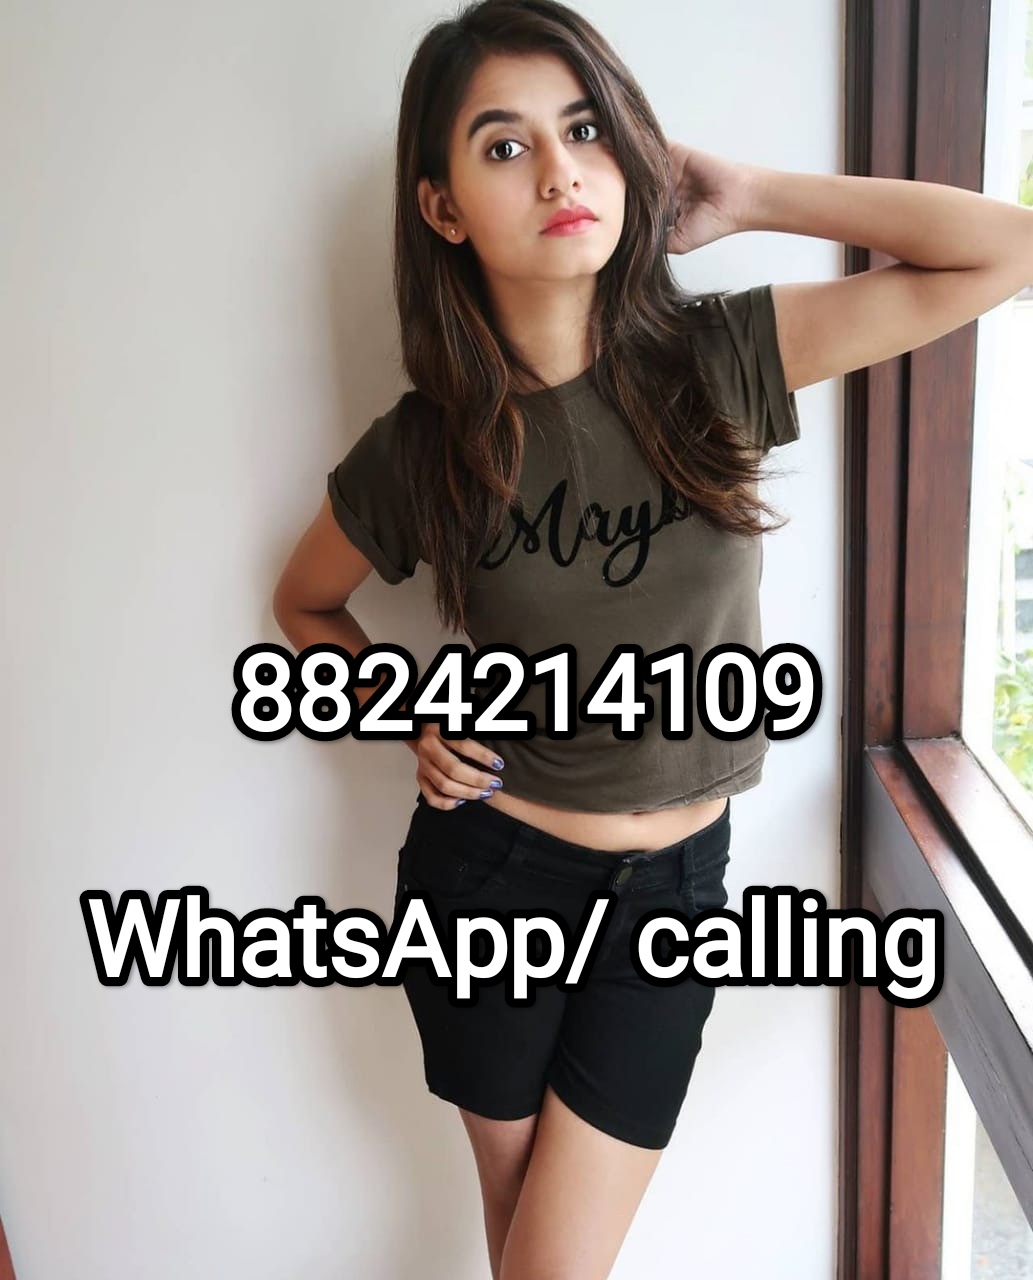 Chennai high quality girl with full safe and satisfaction 